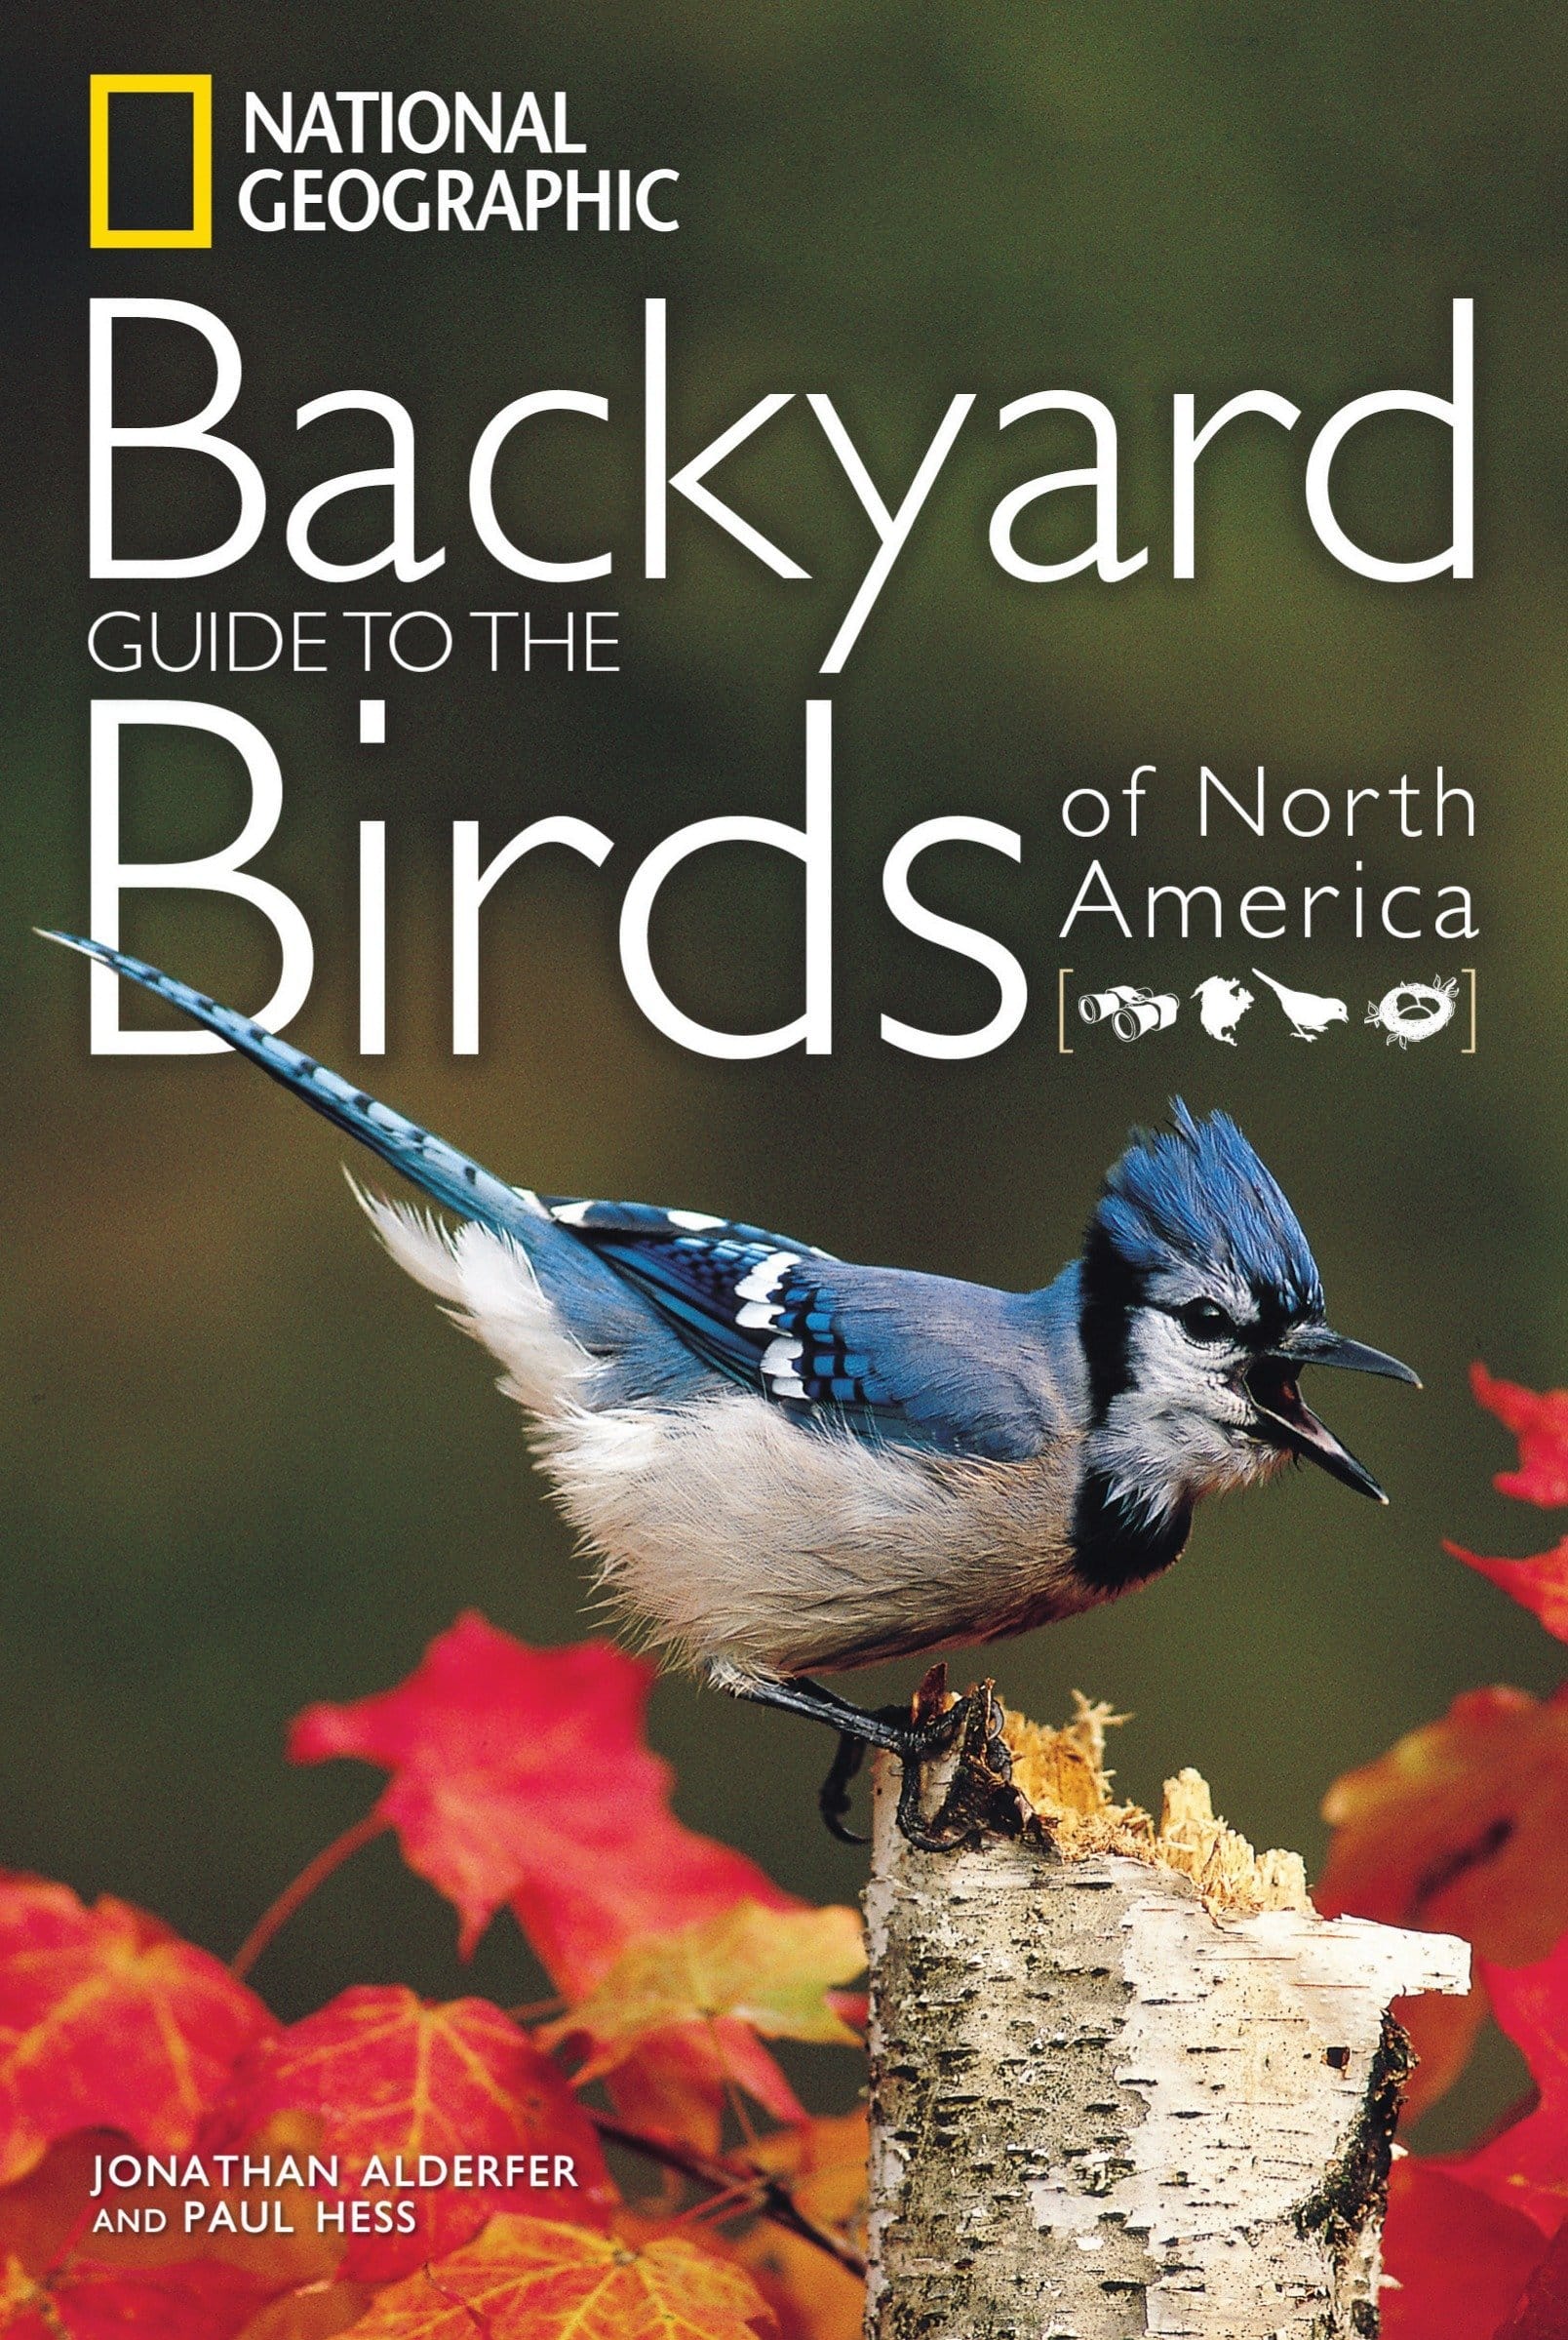 LIGHTNING DEAL ALERT! National Geographic Backyard Guide to the Birds 46% off